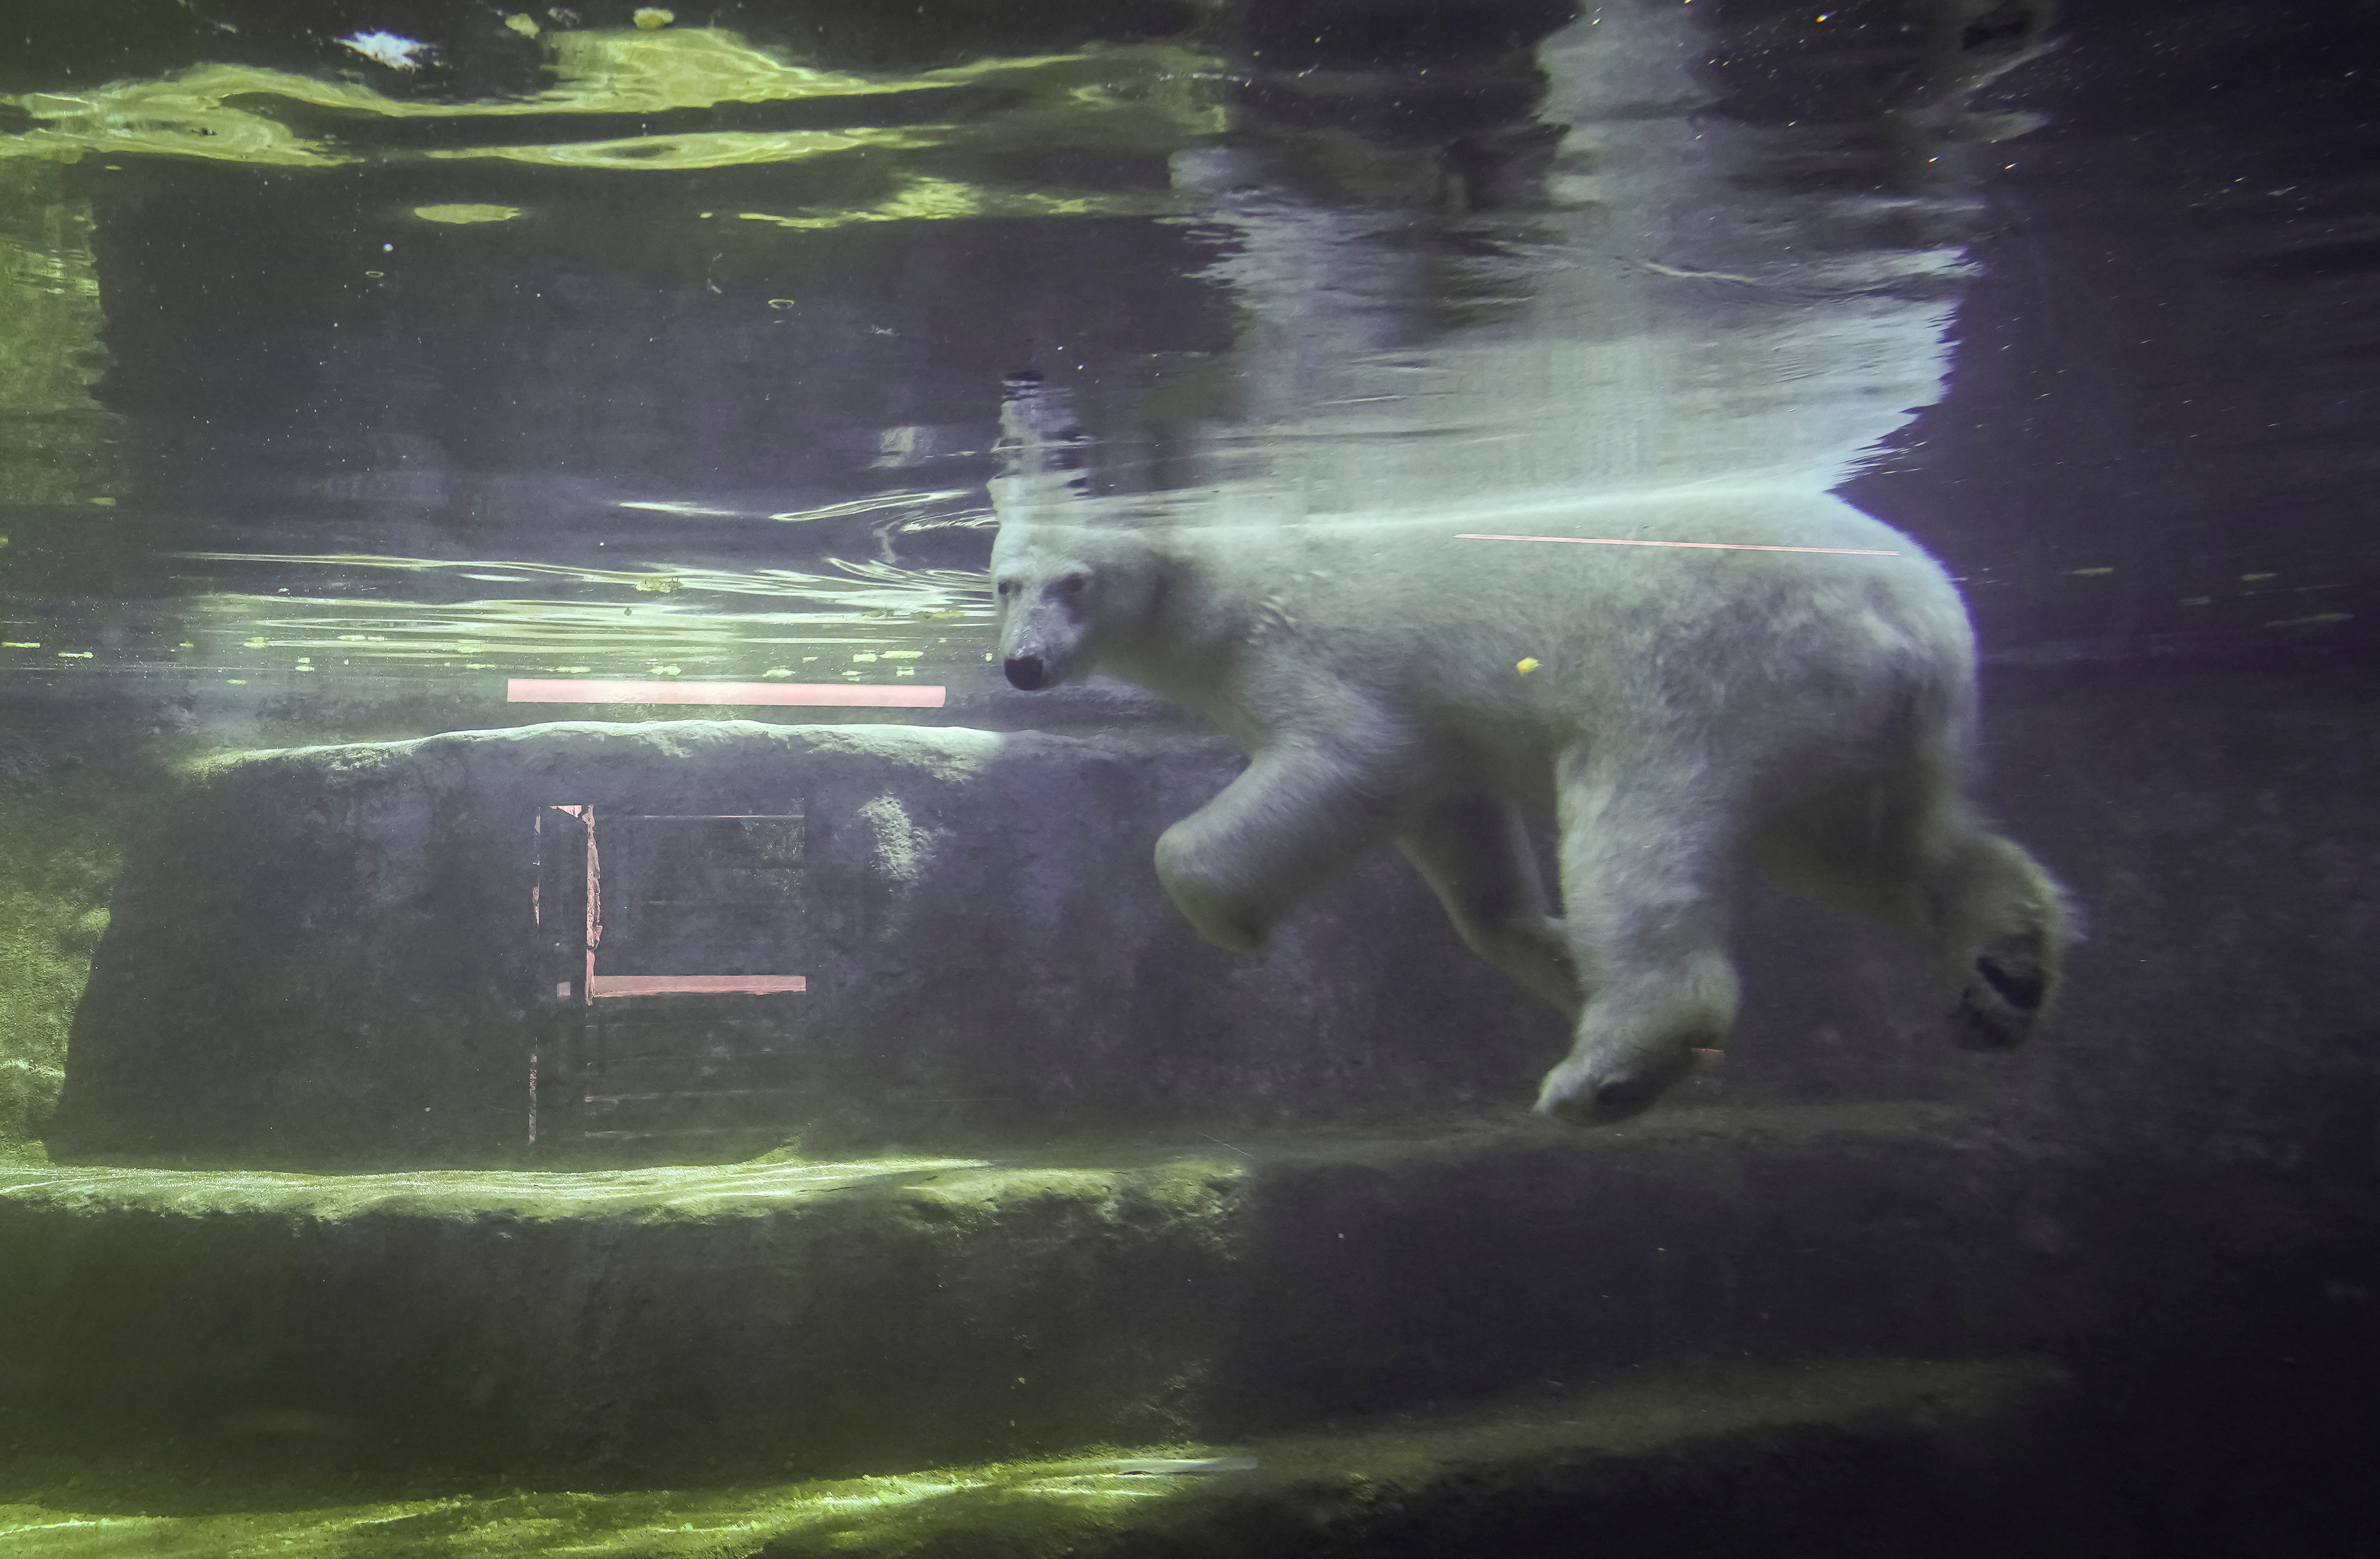 A polar bear cools off during a hot summer day in its enclosure at the Moscow Zoo